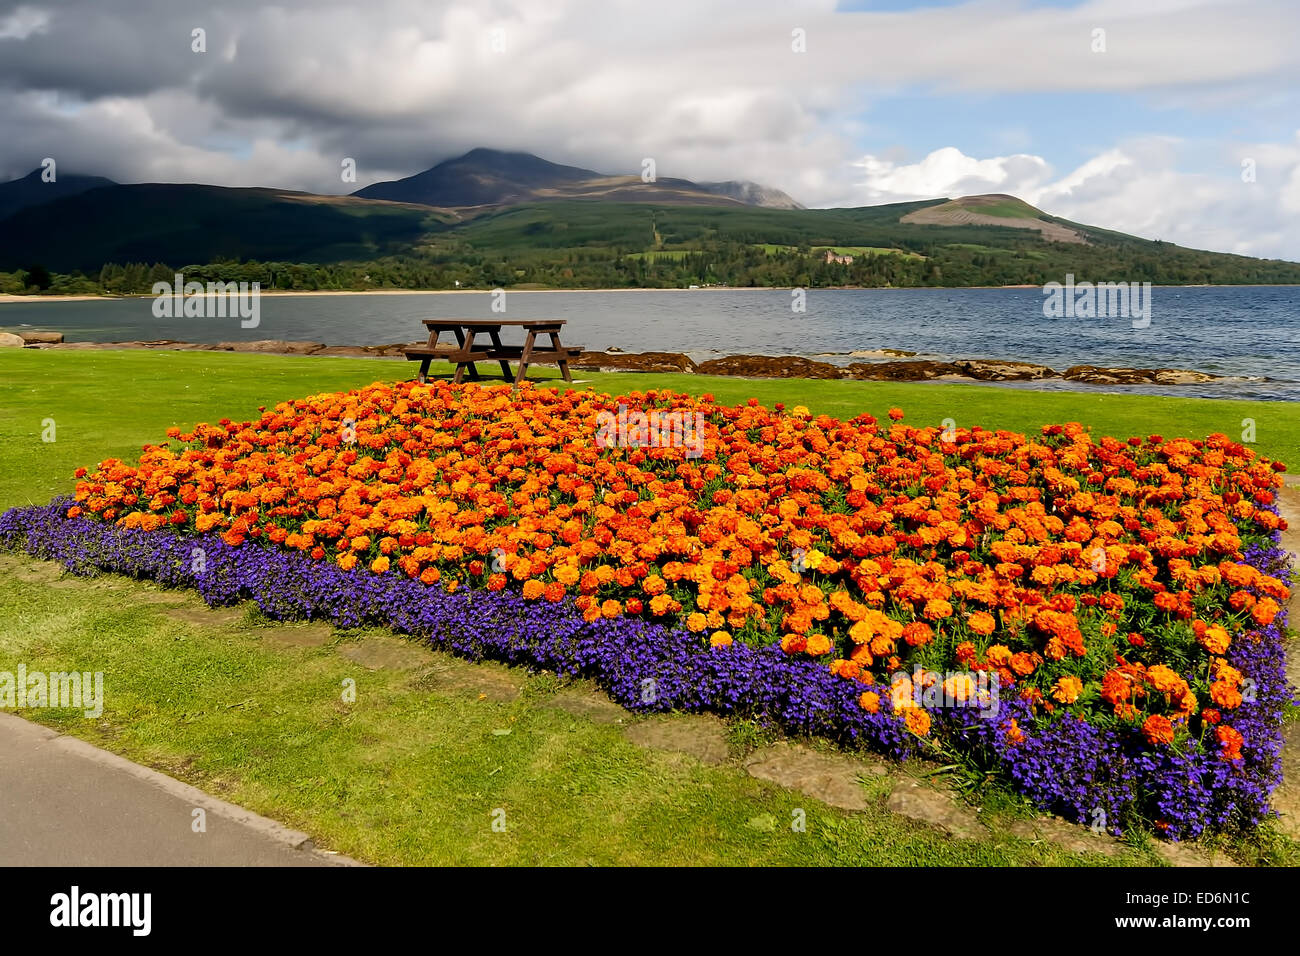 The views to Goat Fell on the Isle of Arran, Scotland from Brodick Stock Photo